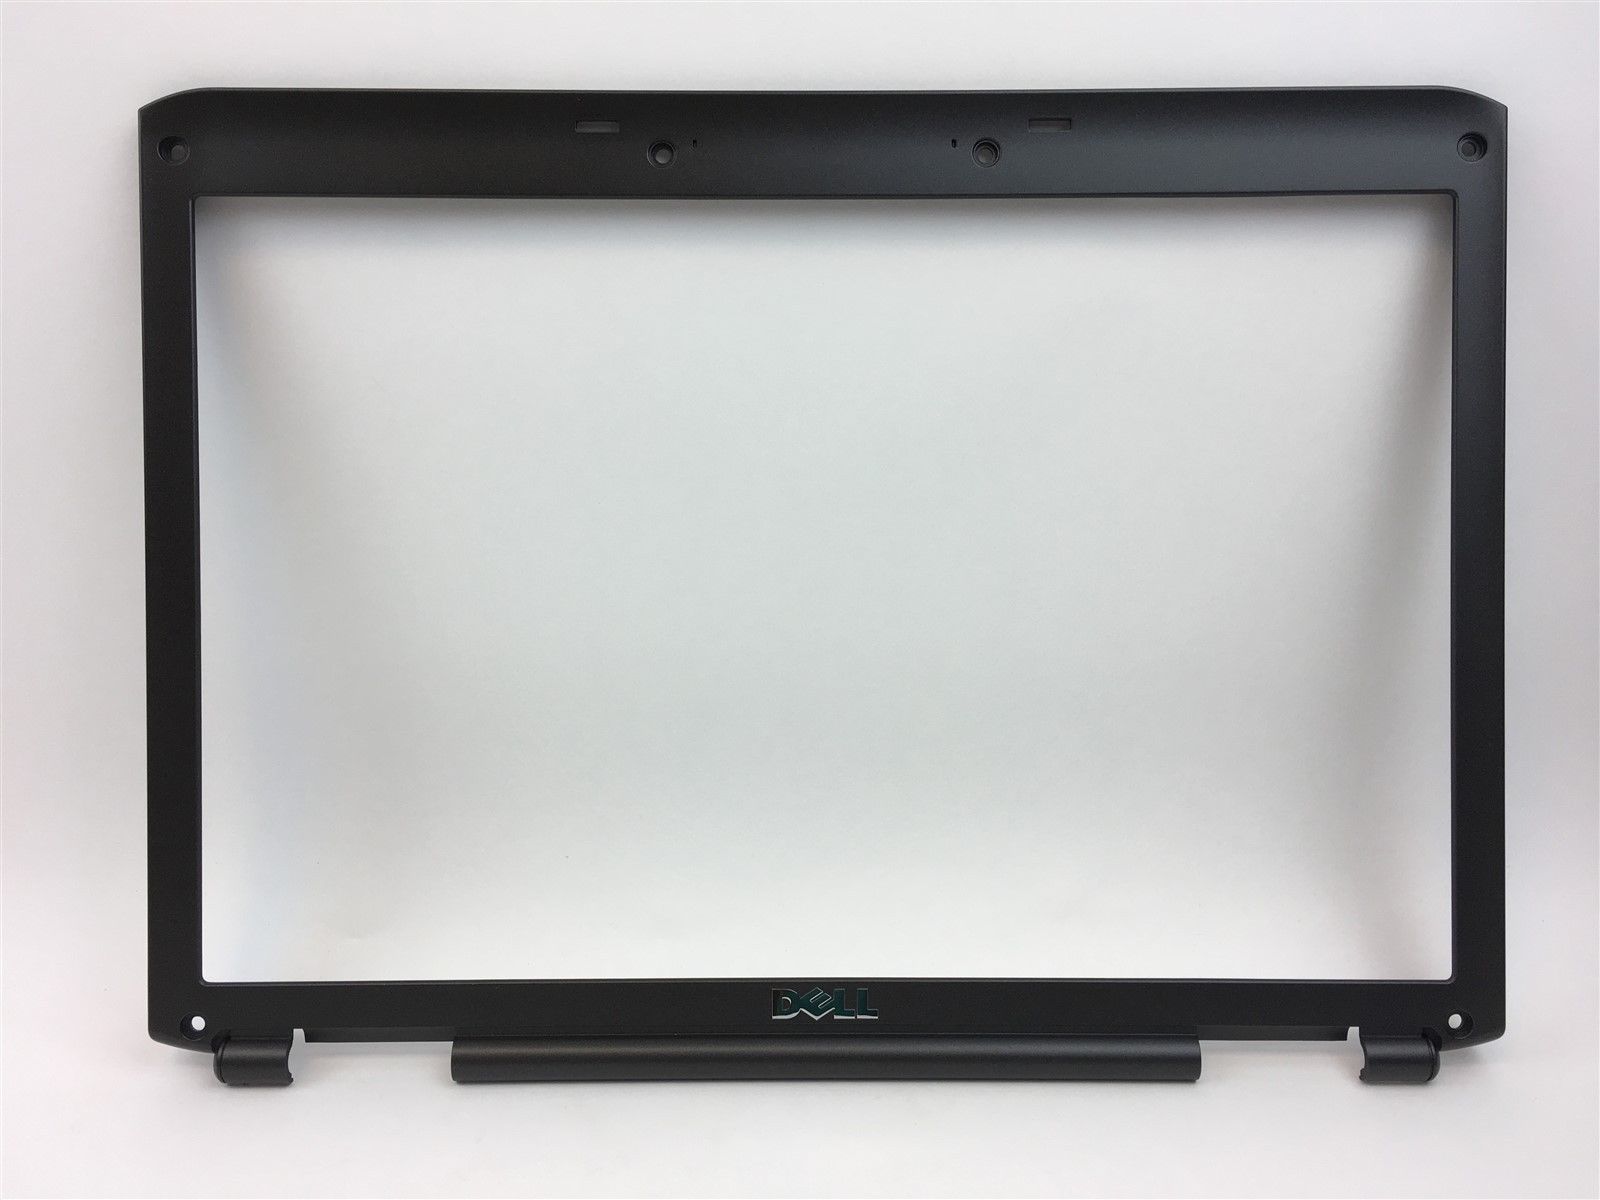 Dell Vostro 1500 15.4" Laptop LCD Screen Bezel Trim Frame Housing NW680 0NW680